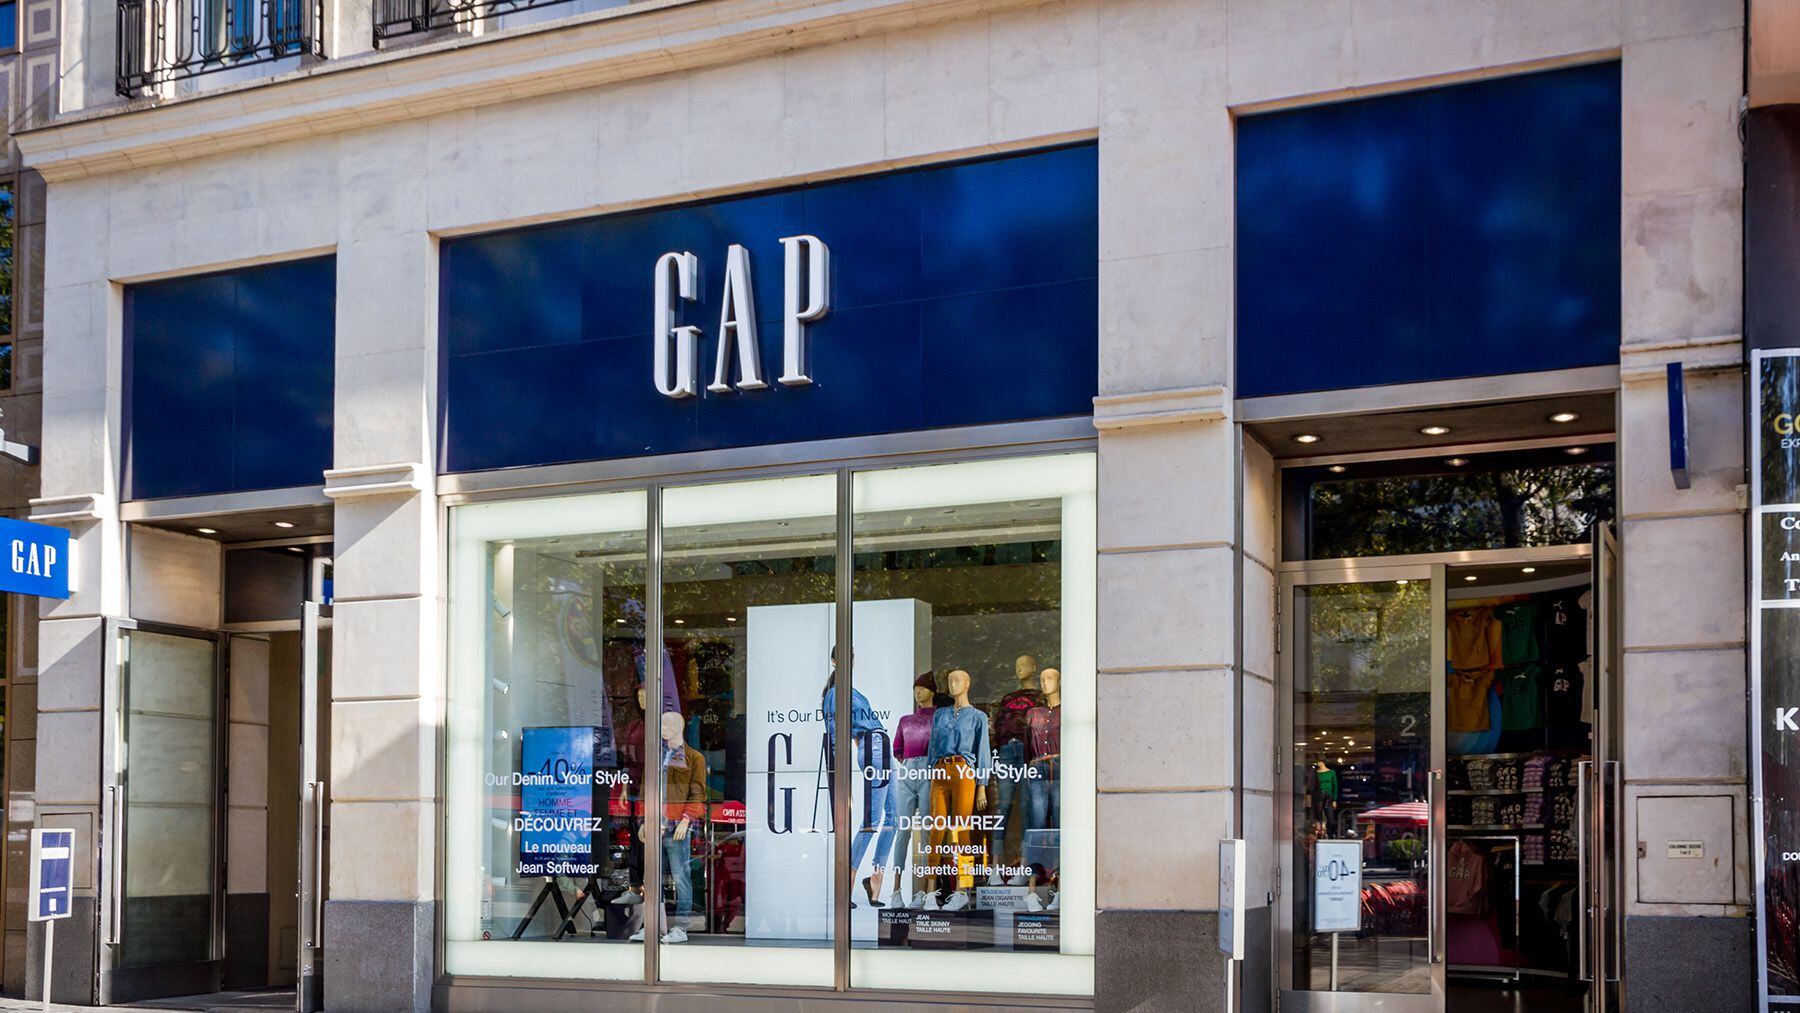 Gap Surpasses Expectations in Early Win for New CEO Dickson